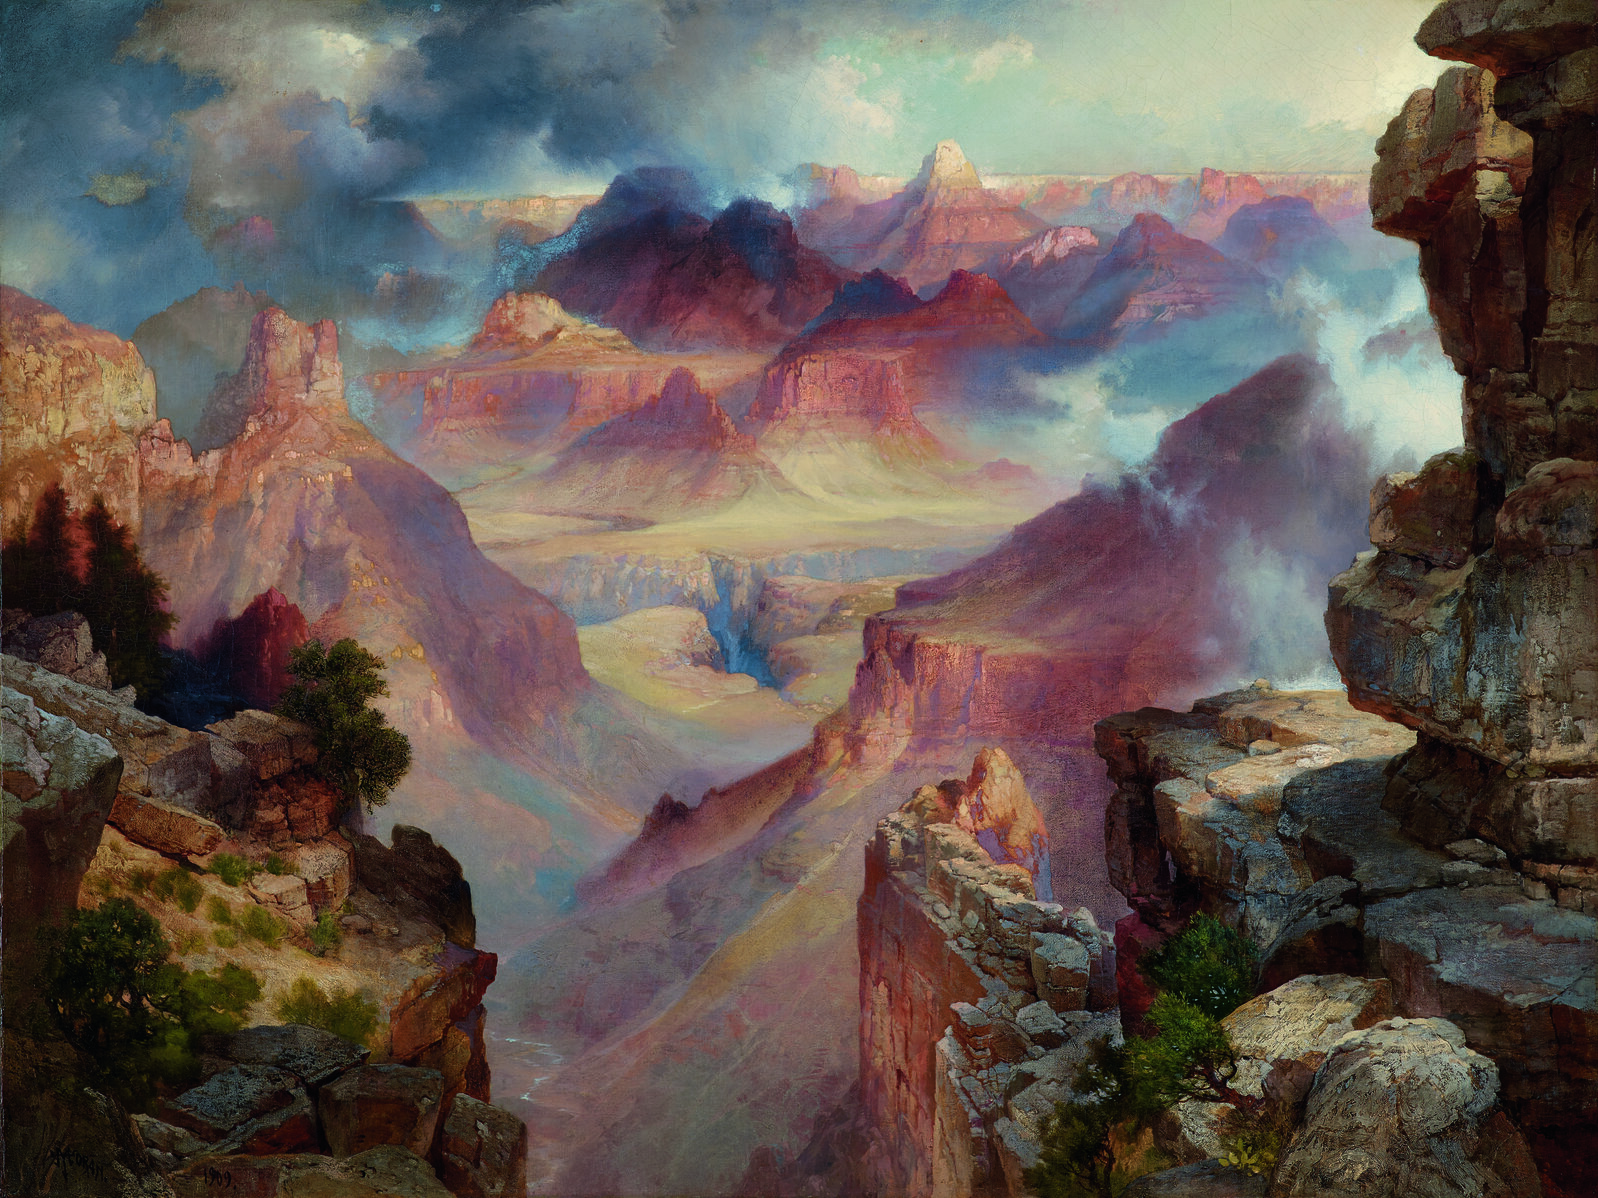 Grand Canyon of Arizona at Sunset by Thomas Moran - 1909 - 76.2 × 101.6 cm private collection